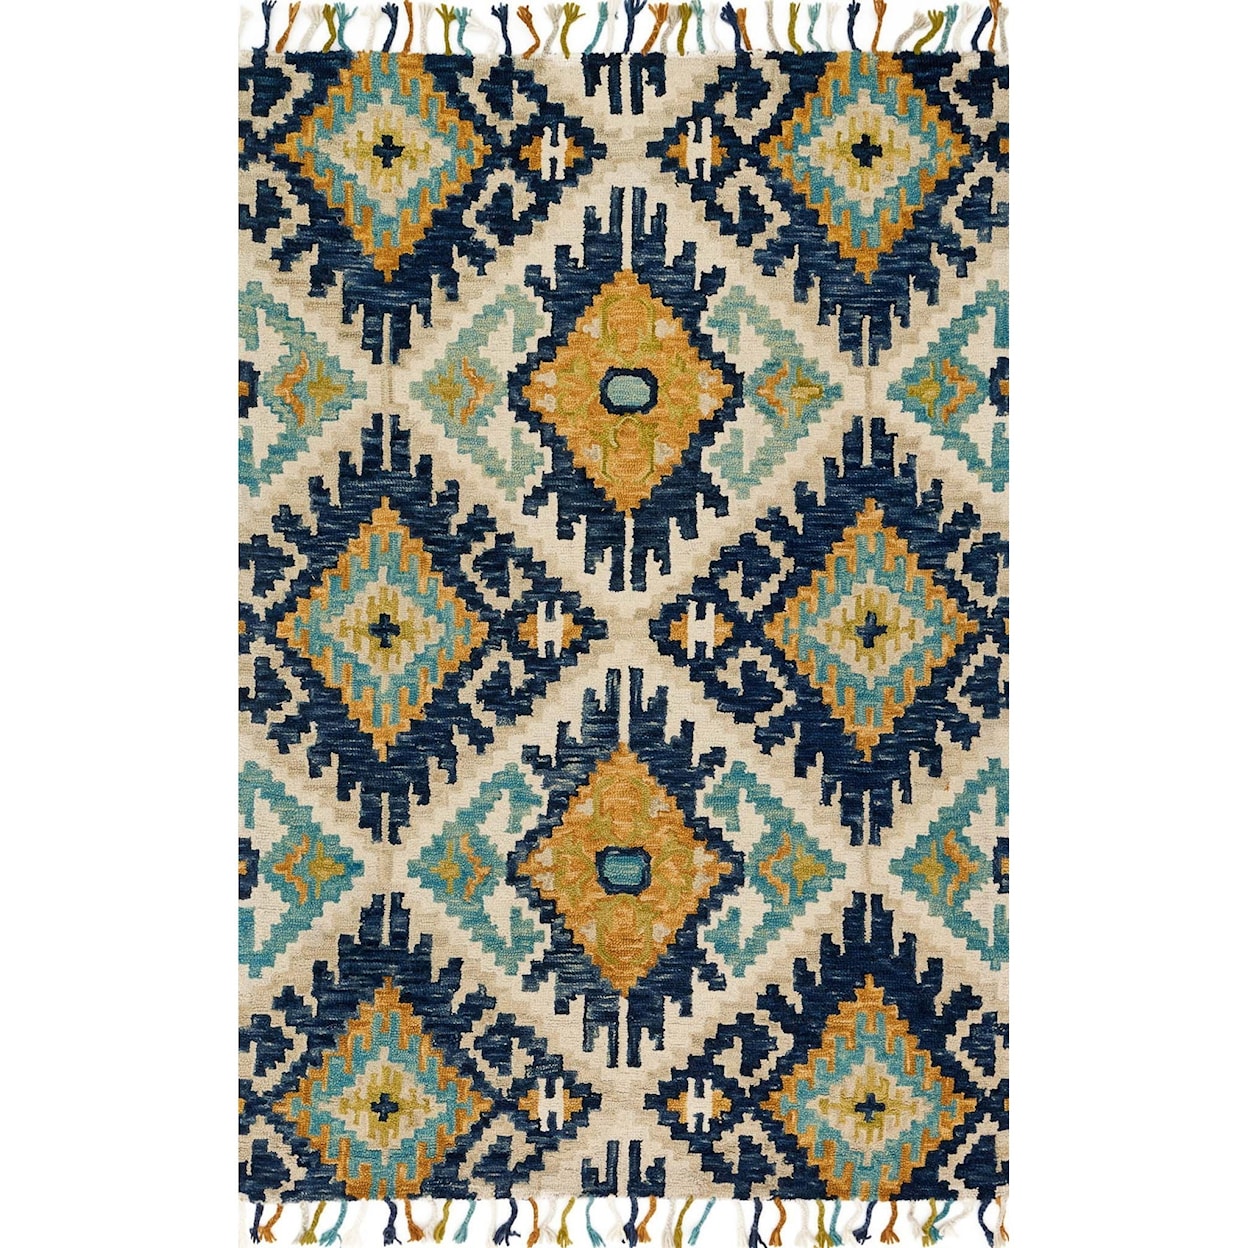 Magnolia Home by Joanna Gaines for Loloi Brushstroke 5' 0" x 7' 6" Rectangle Rug